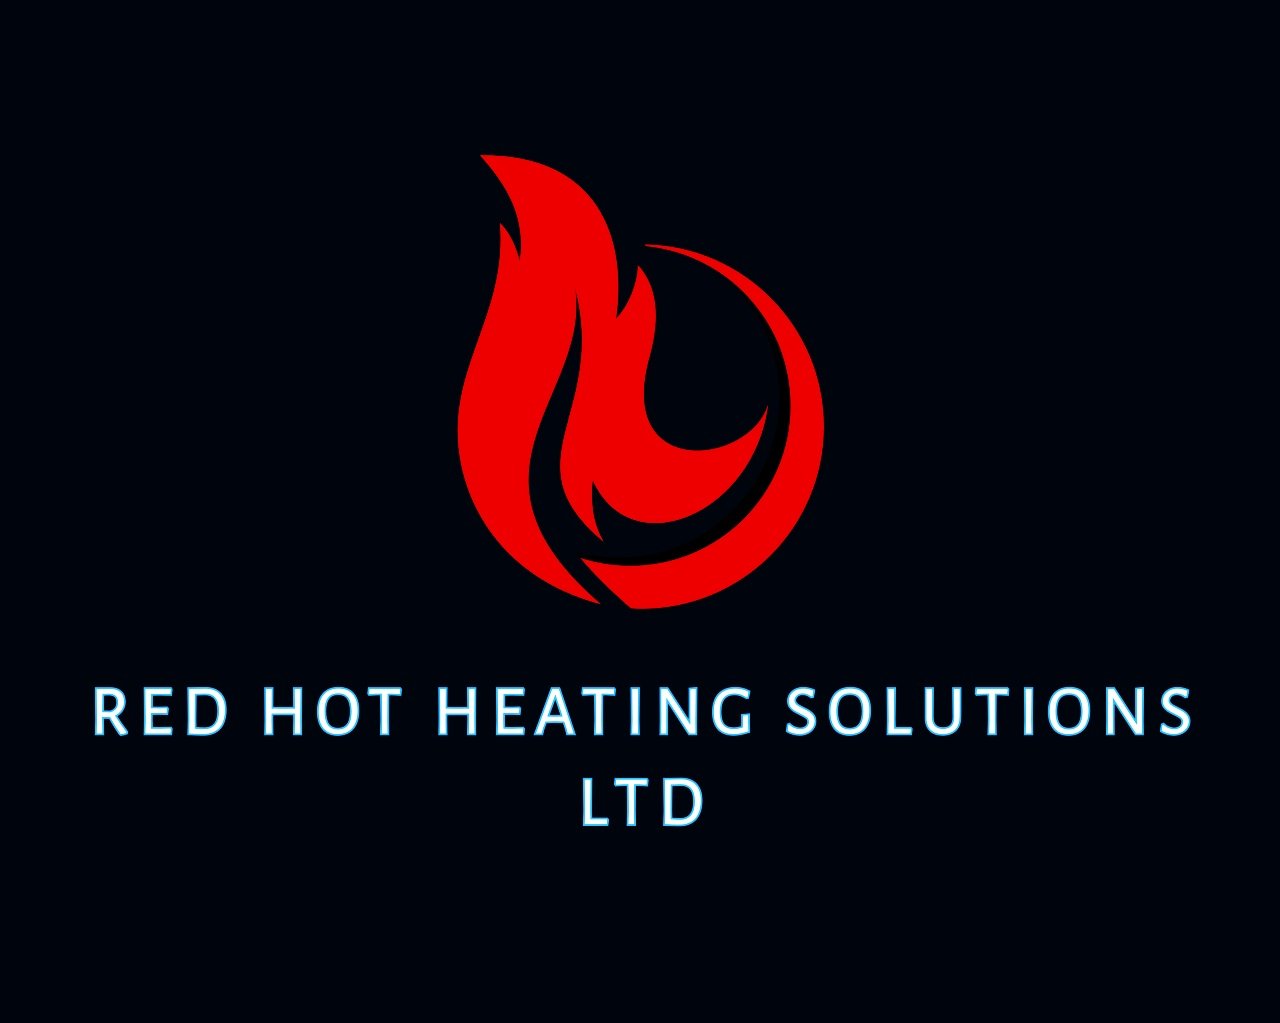 Red Hot Heating Solutions